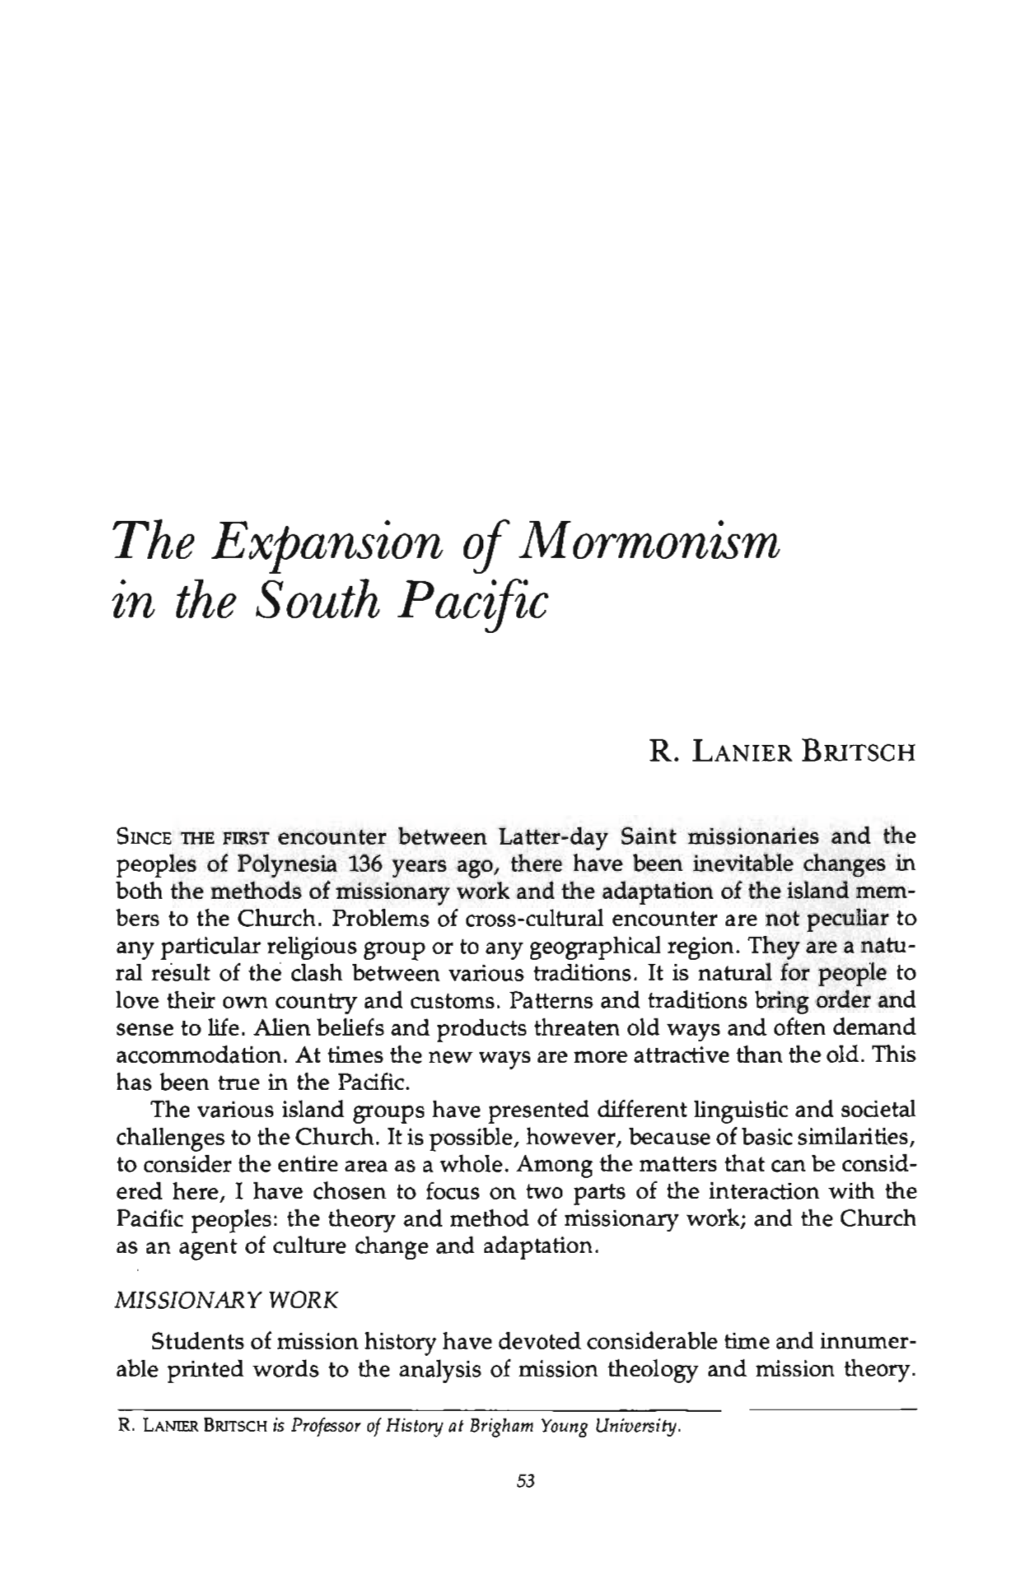 The Expansion of Mormonism in the South Pacific